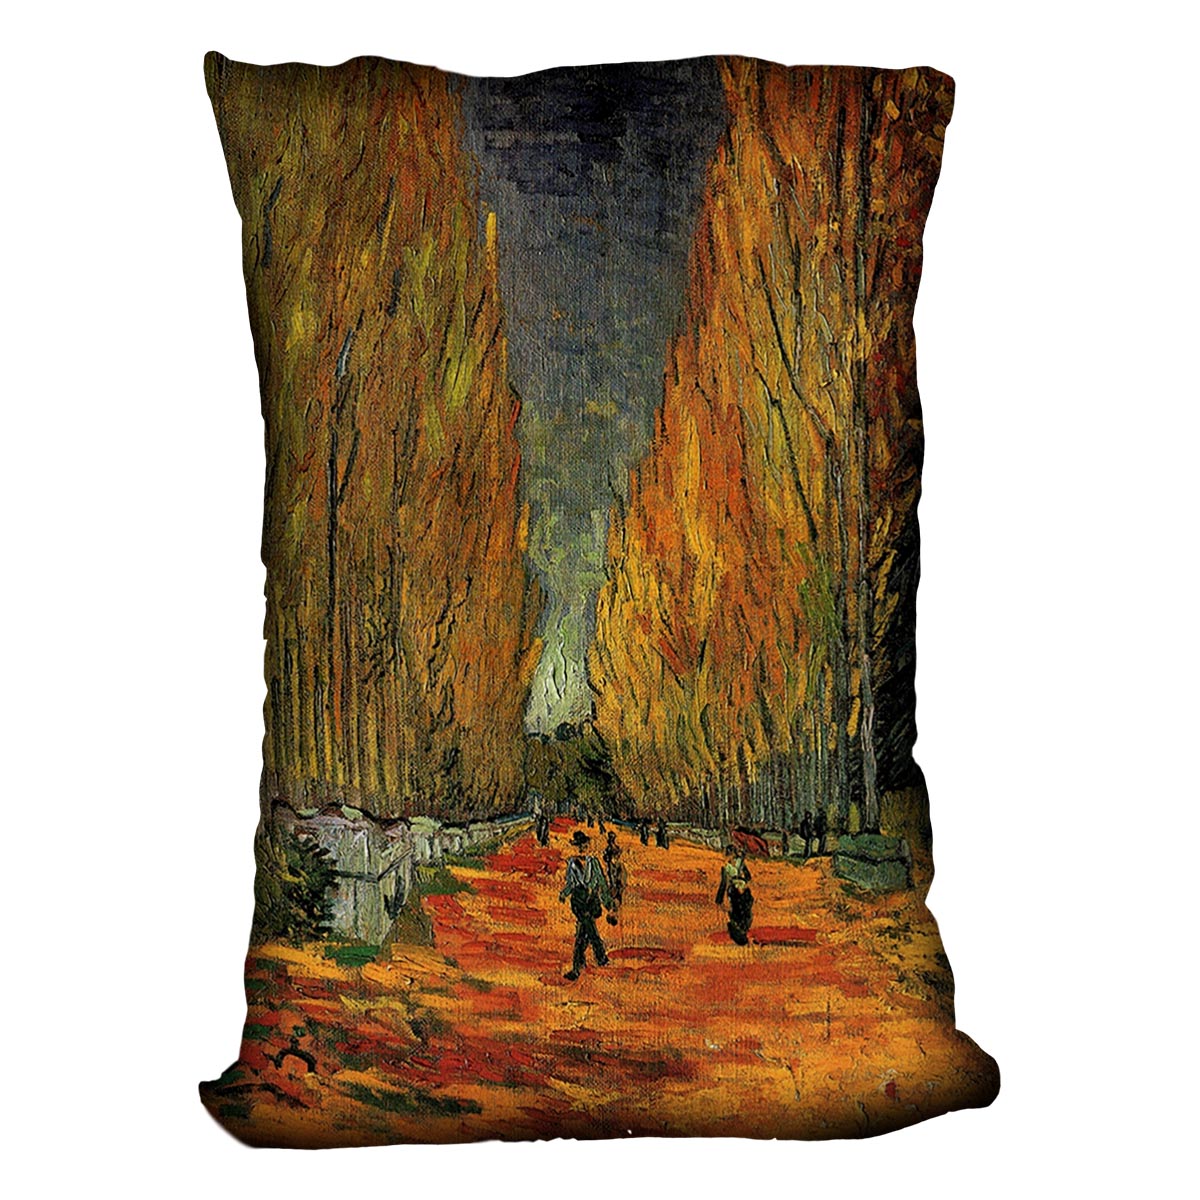 Les Alyscamps 3 by Van Gogh Cushion